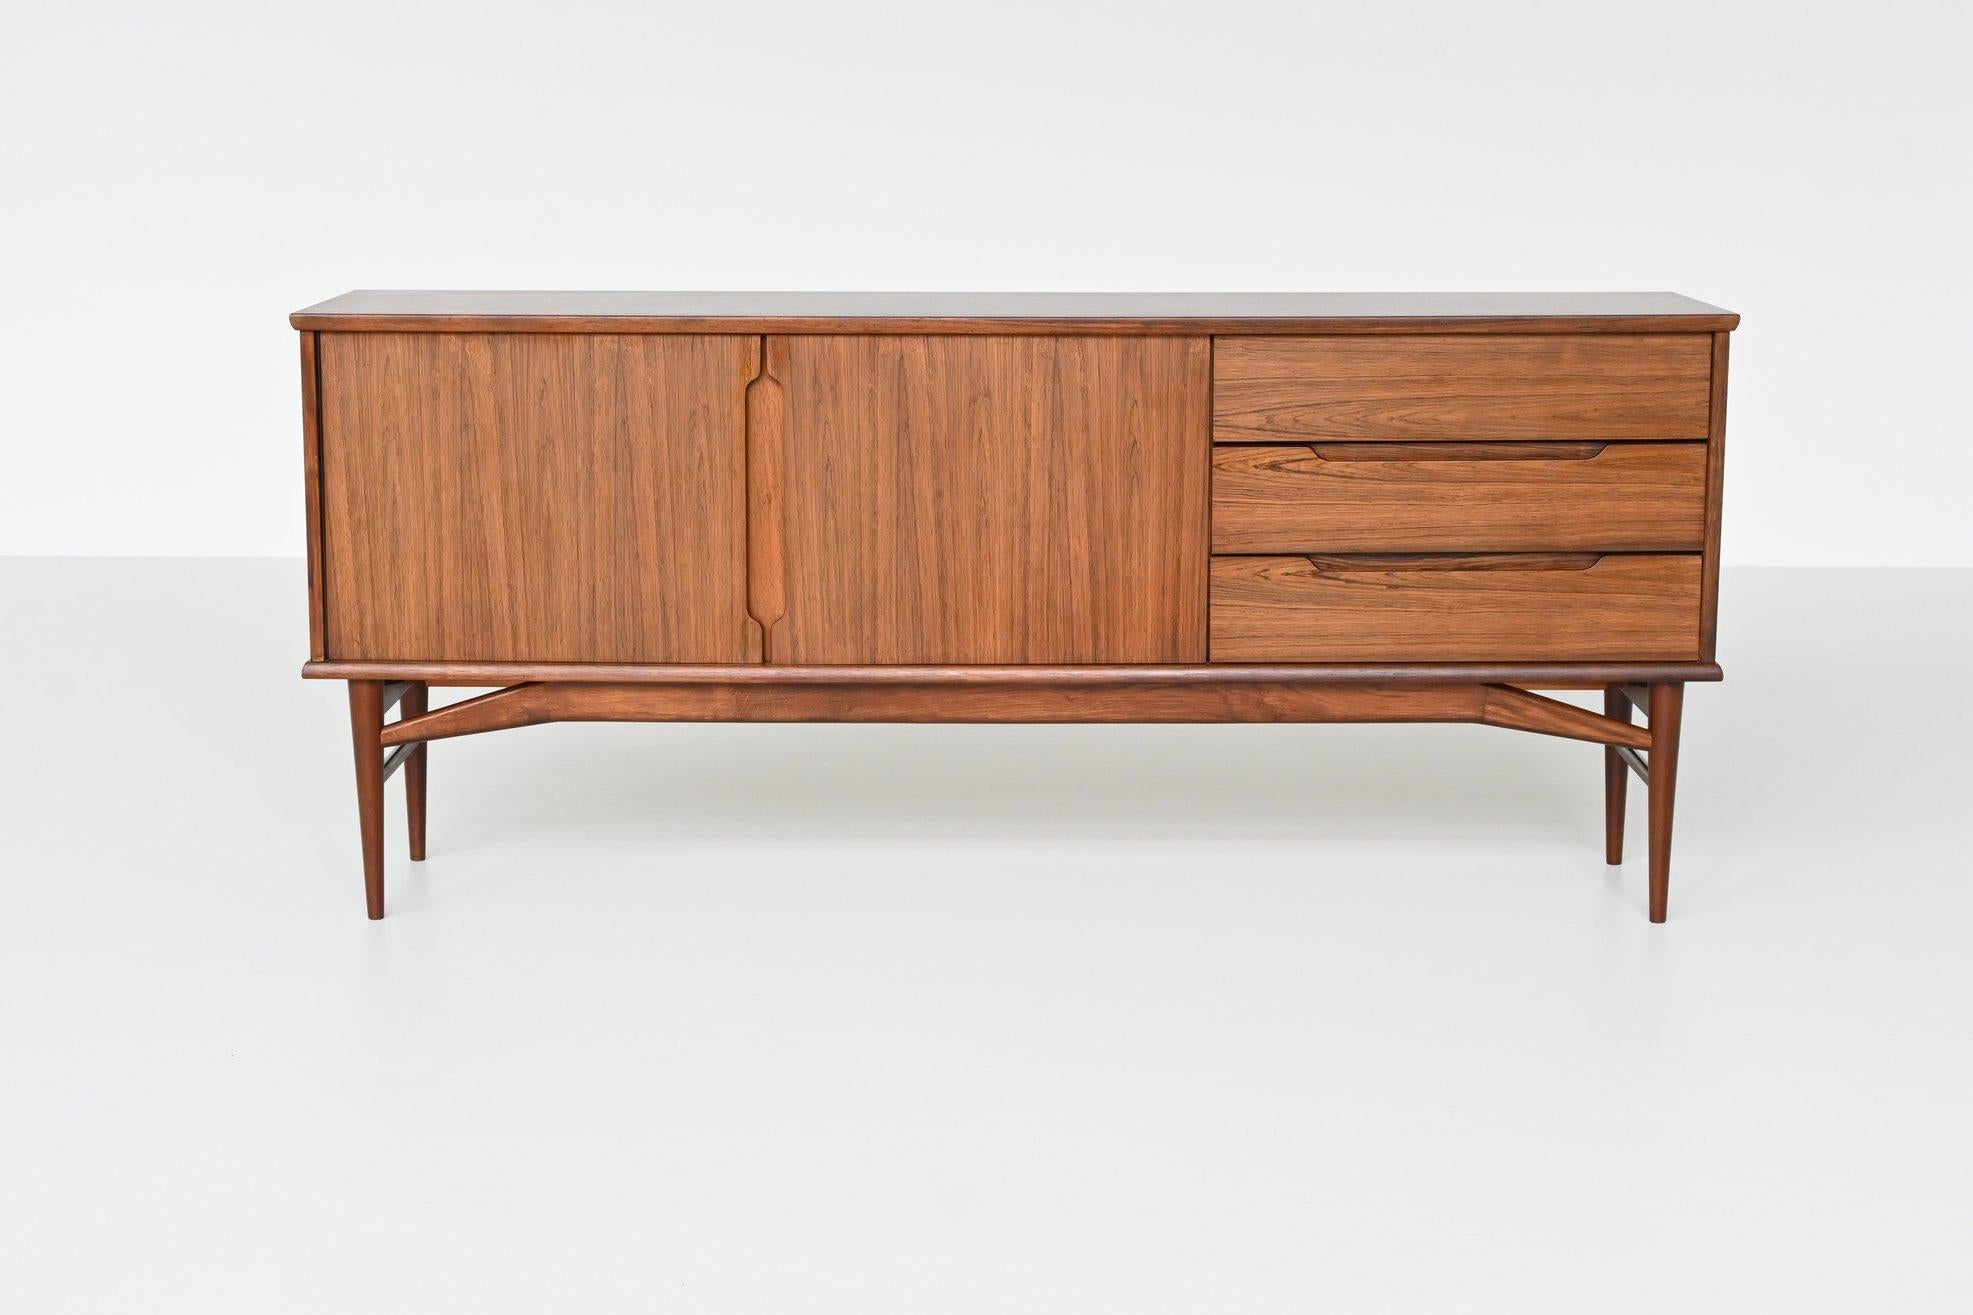 Wonderful Danish sideboard designed by Borge Mogensen and manufactured by Fredericia Stolefabrik, Denmark 1960. This sideboard is made of beautiful grained veneered rosewood with solid legs. It has two doors with a shelf behind and three drawers so